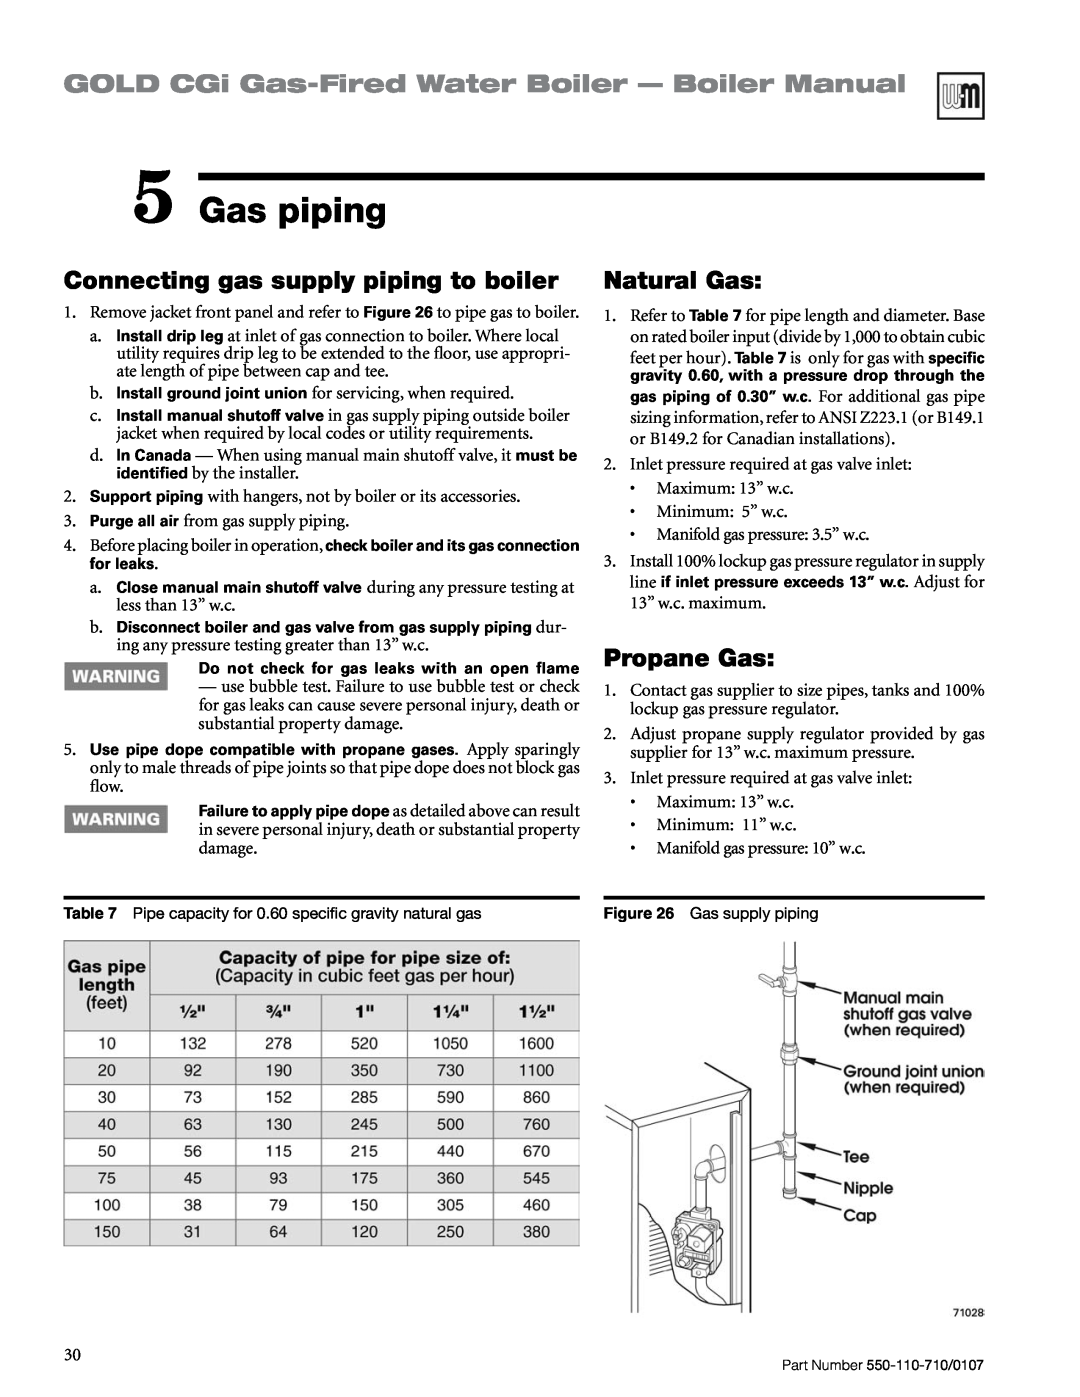 Weil-McLain Series 2 Gas piping, GOLD CGi Gas-FiredWater Boiler — Boiler Manual, Connecting gas supply piping to boiler 